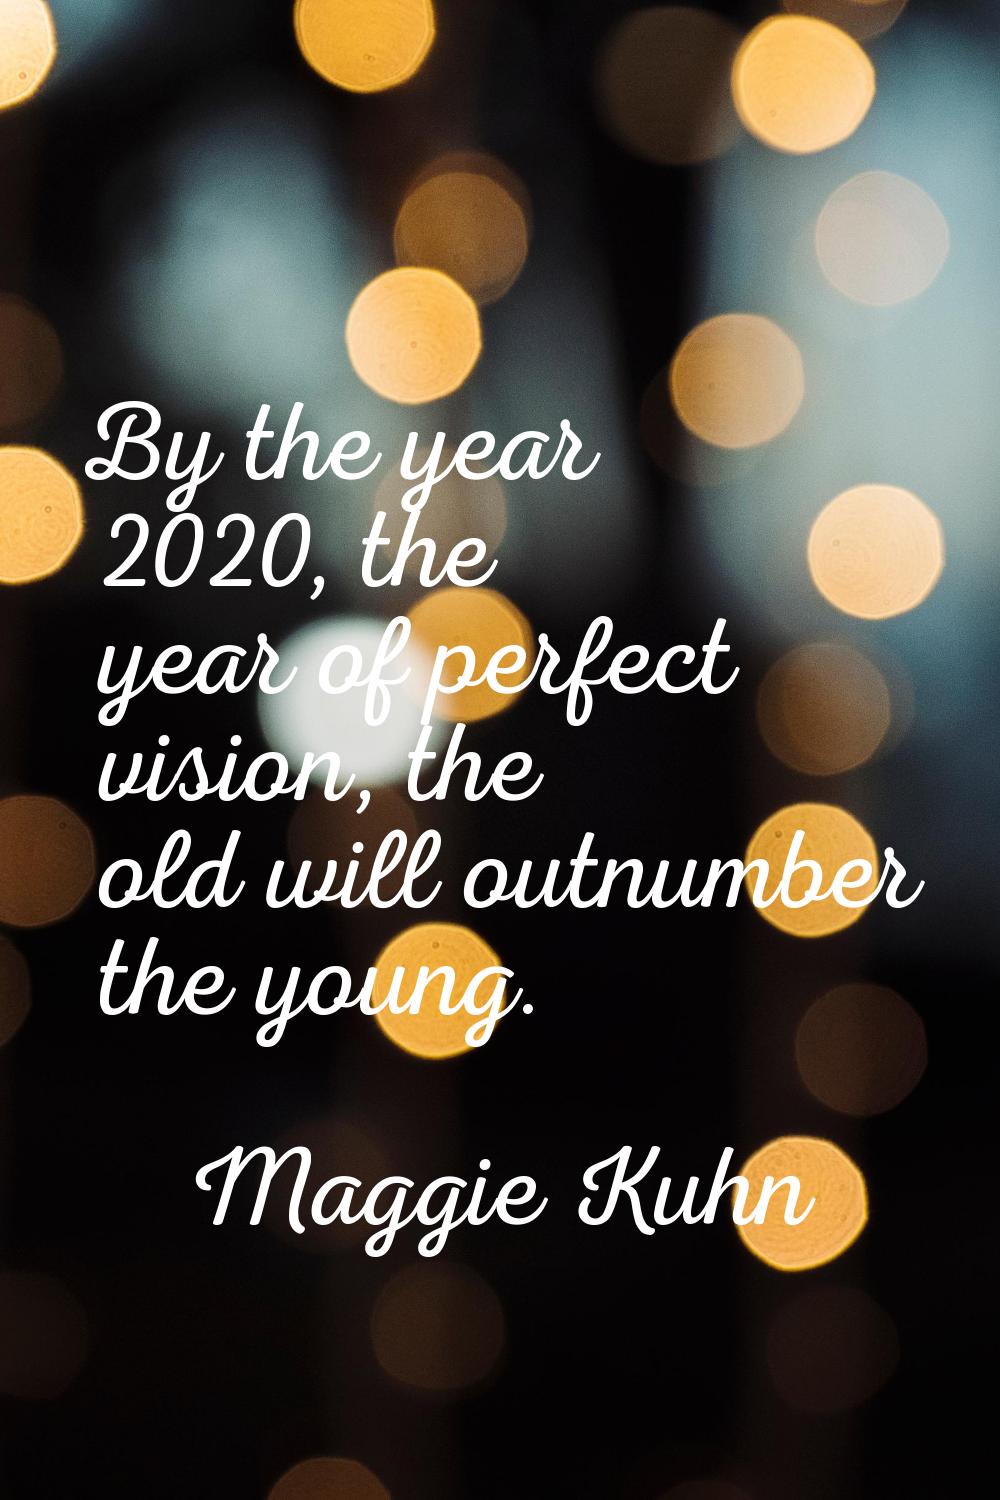 By the year 2020, the year of perfect vision, the old will outnumber the young.